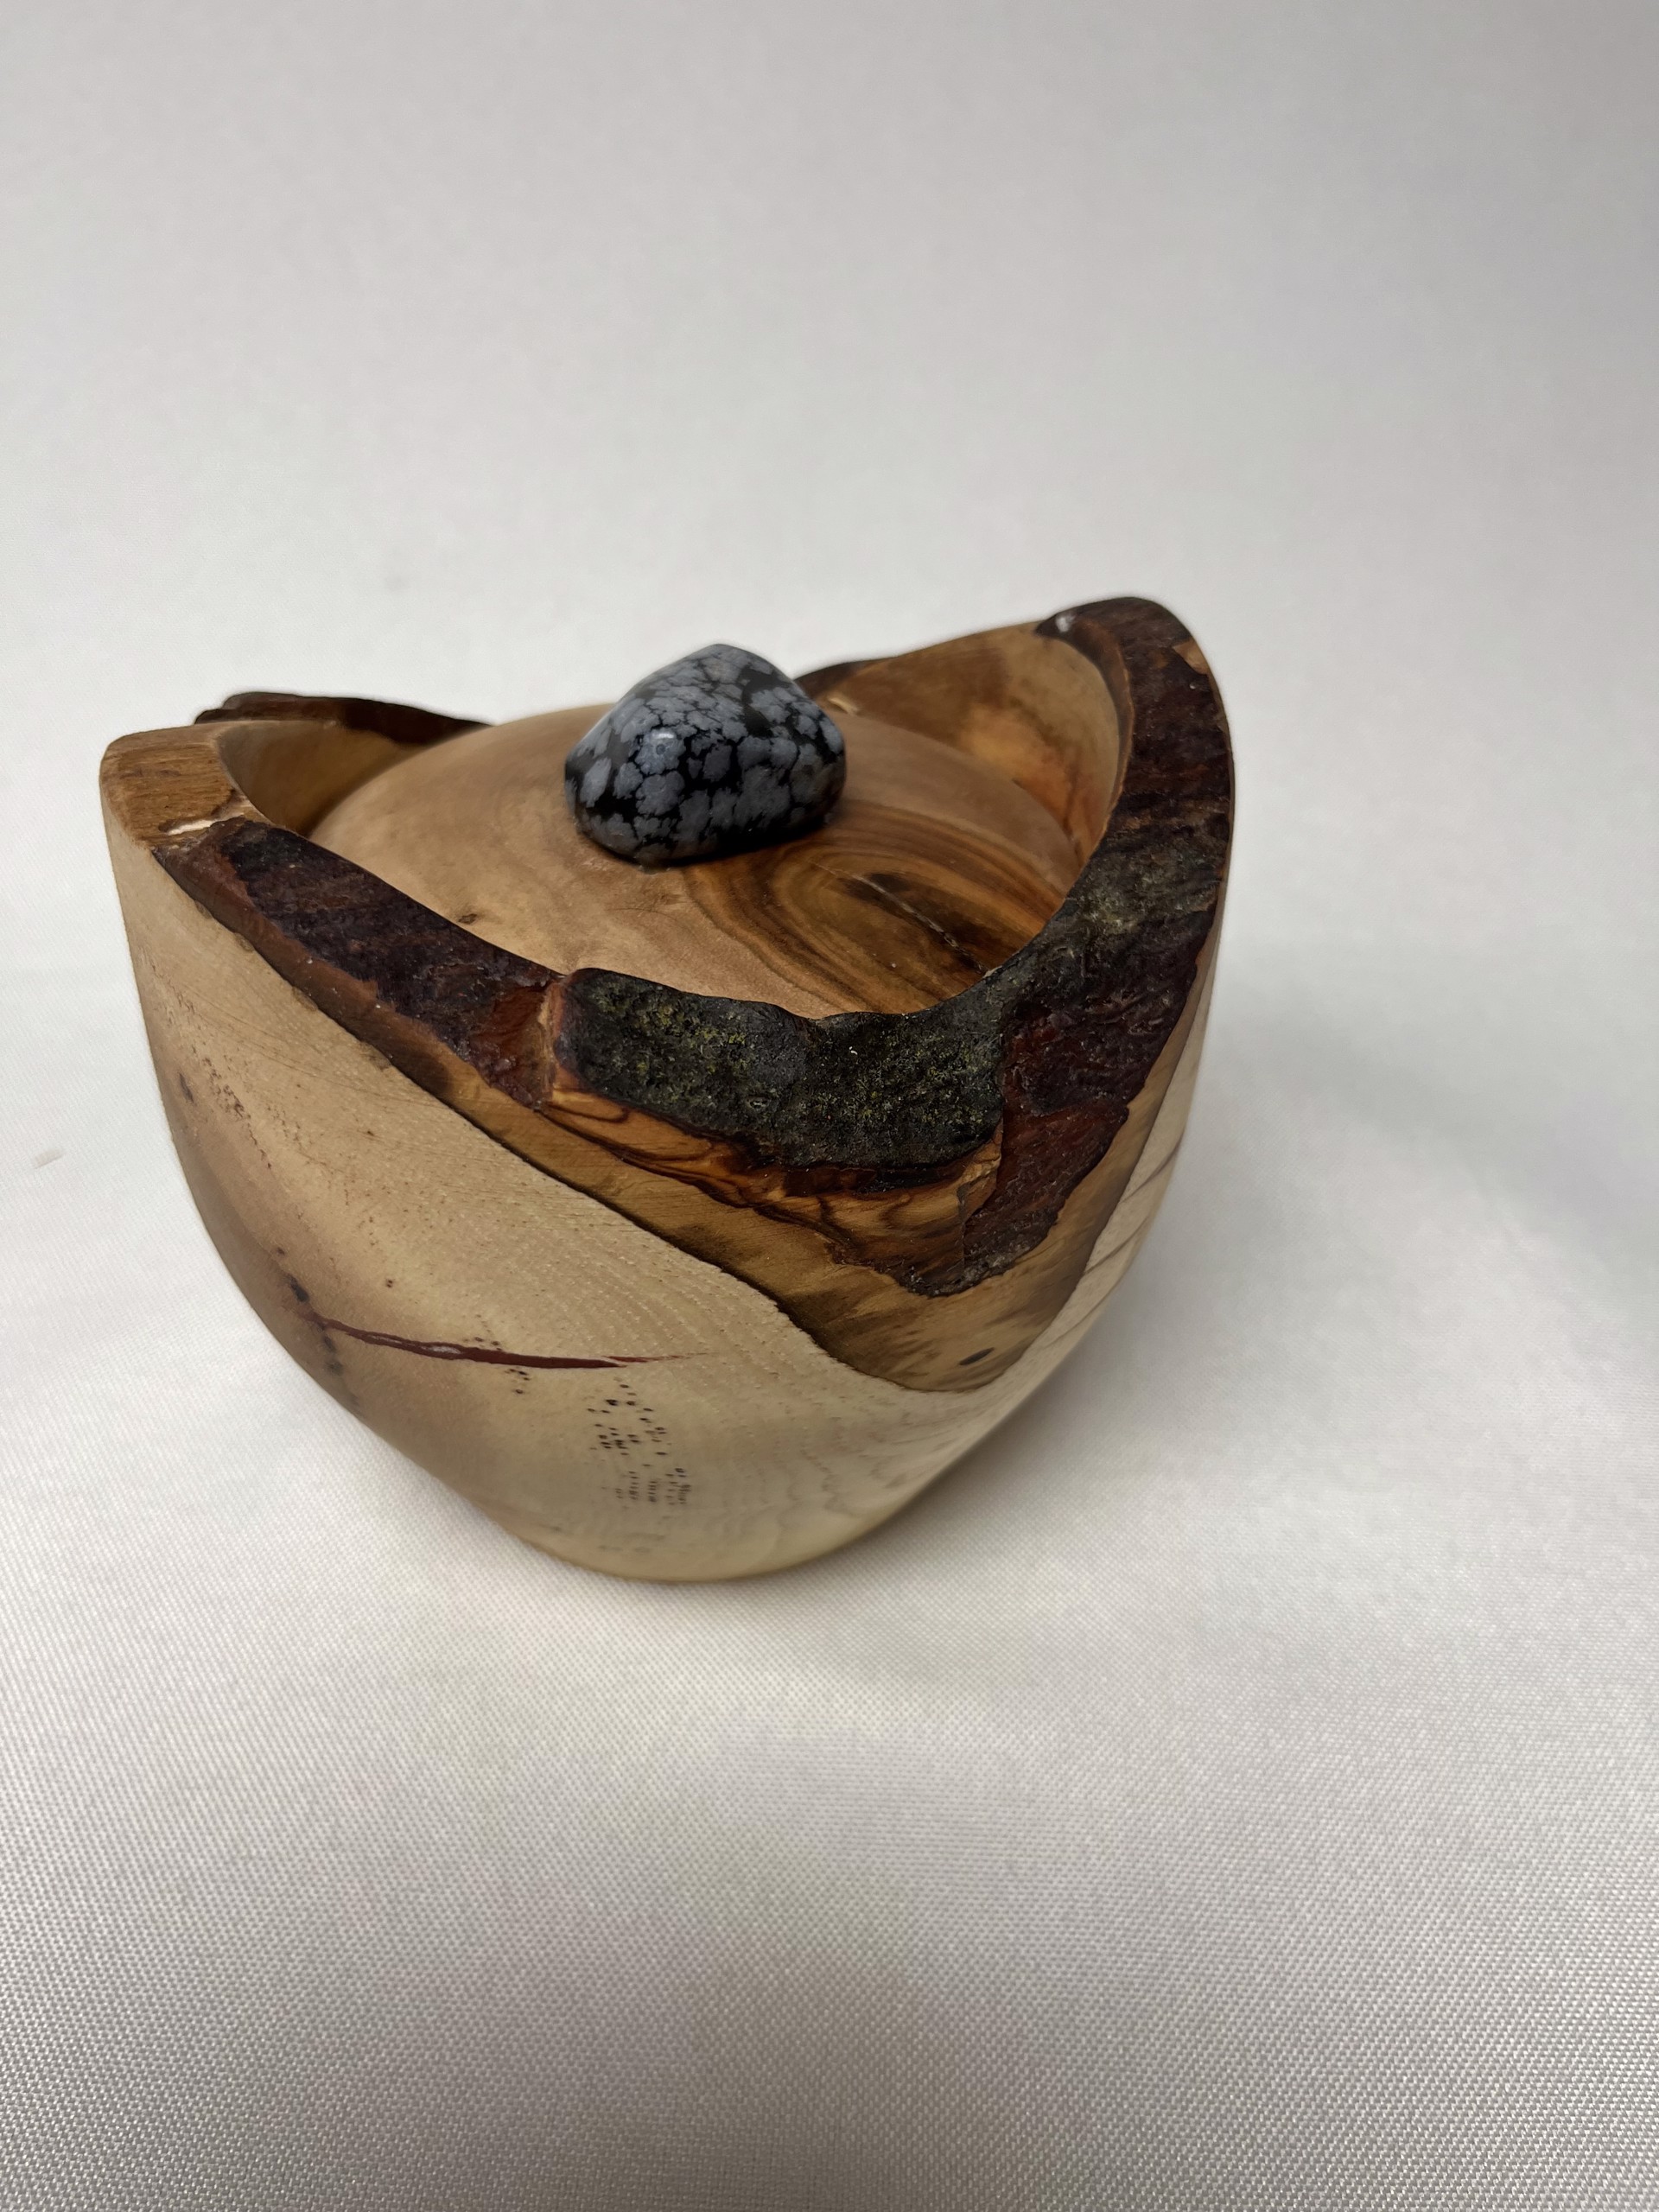 Turned Wood Jar W/Lid #23-30 by Rick Squires